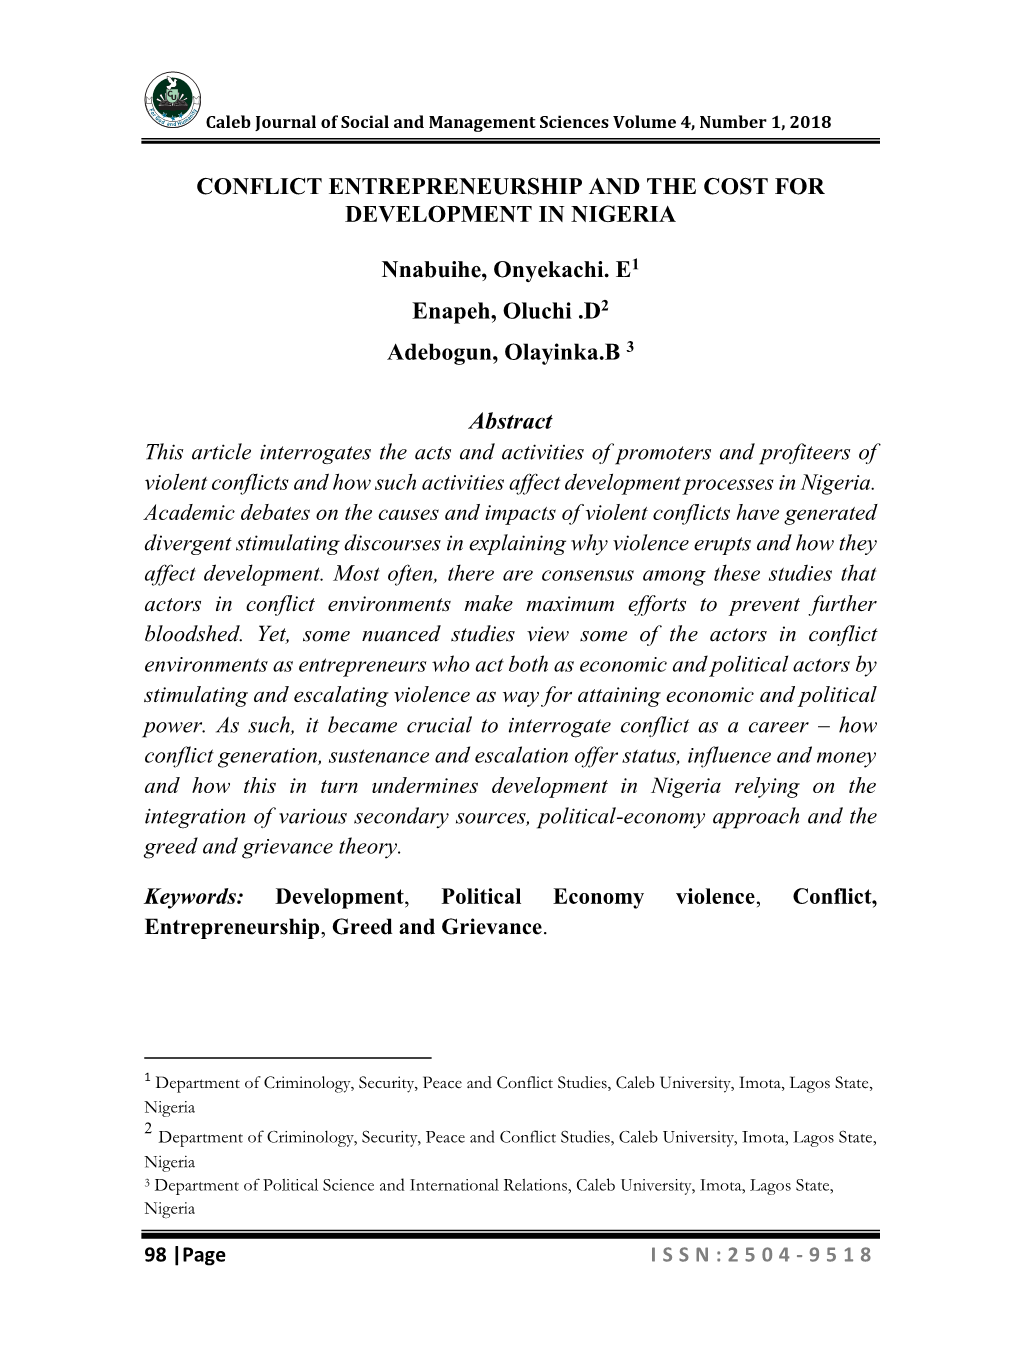 Conflict Entrepreneurship and the Cost for Development in Nigeria